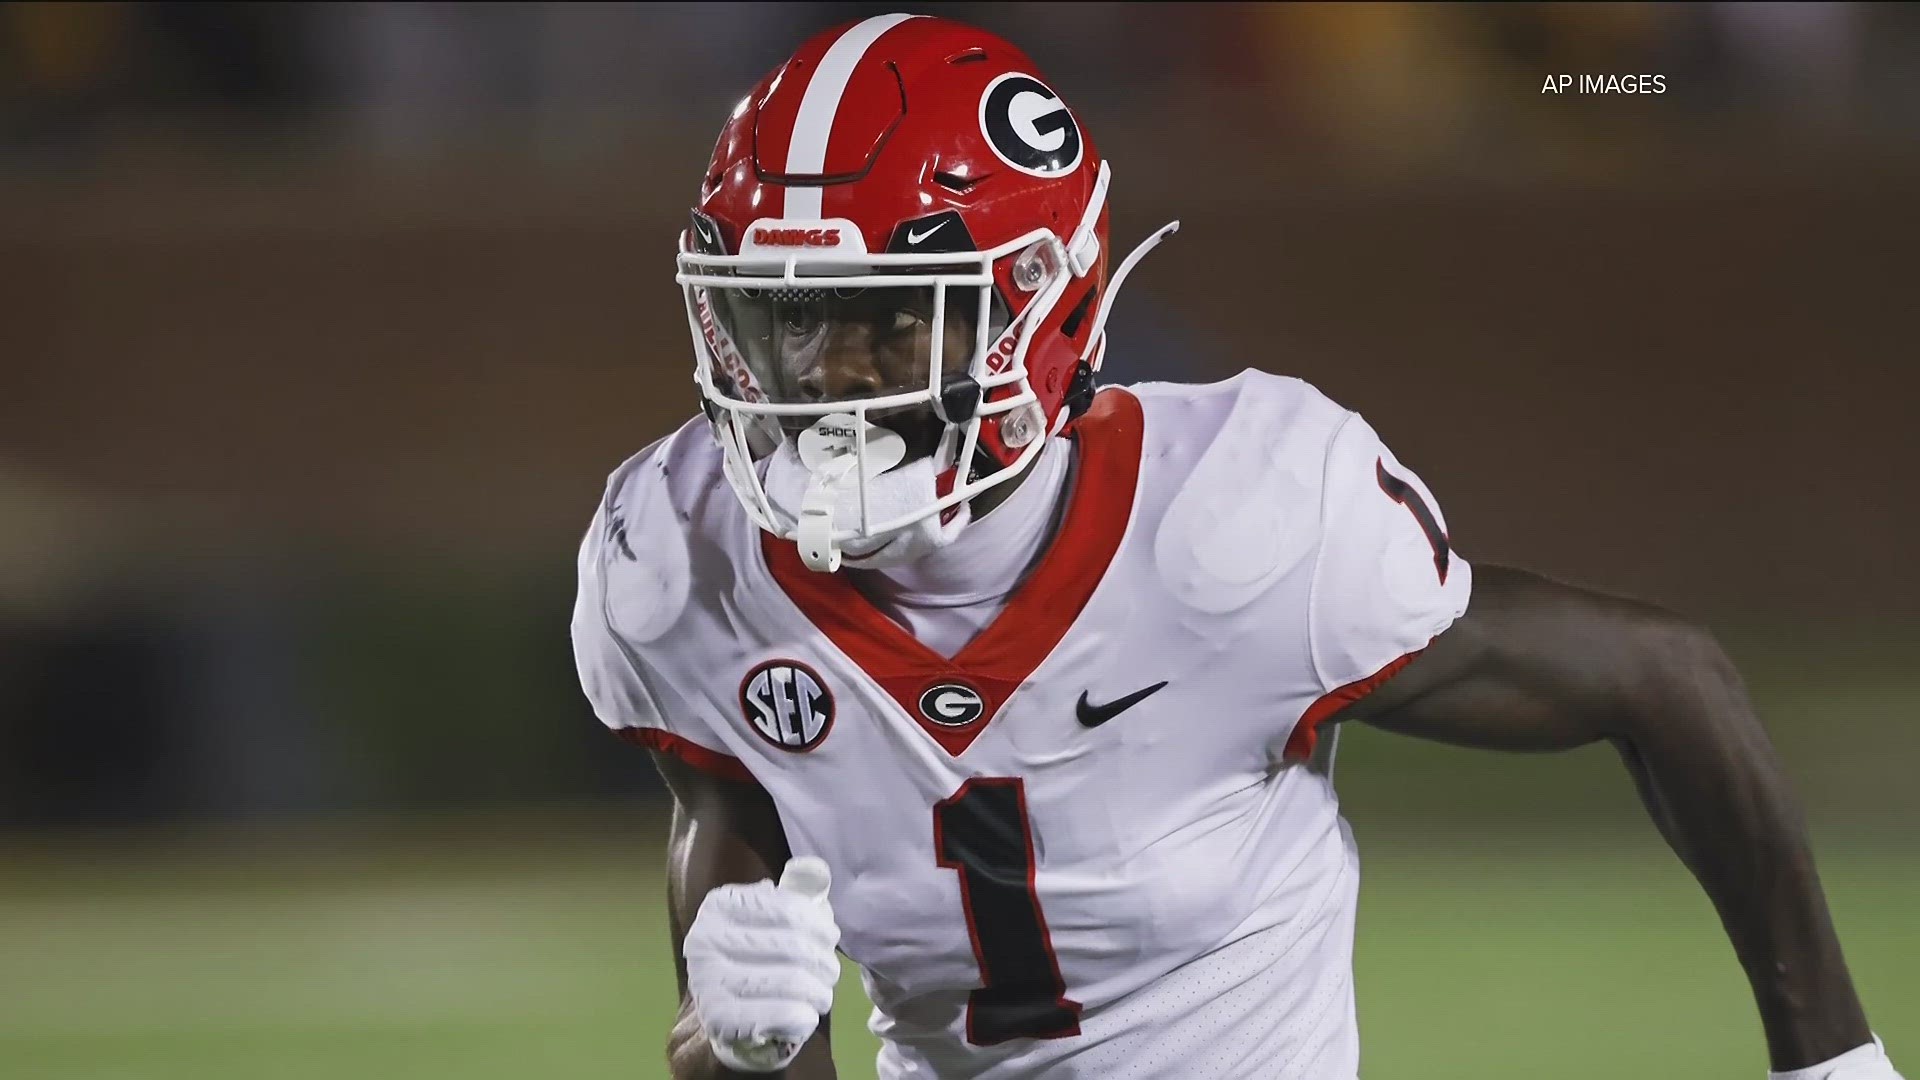 11Alive has reached out to UGA's Athletic Department for a response.